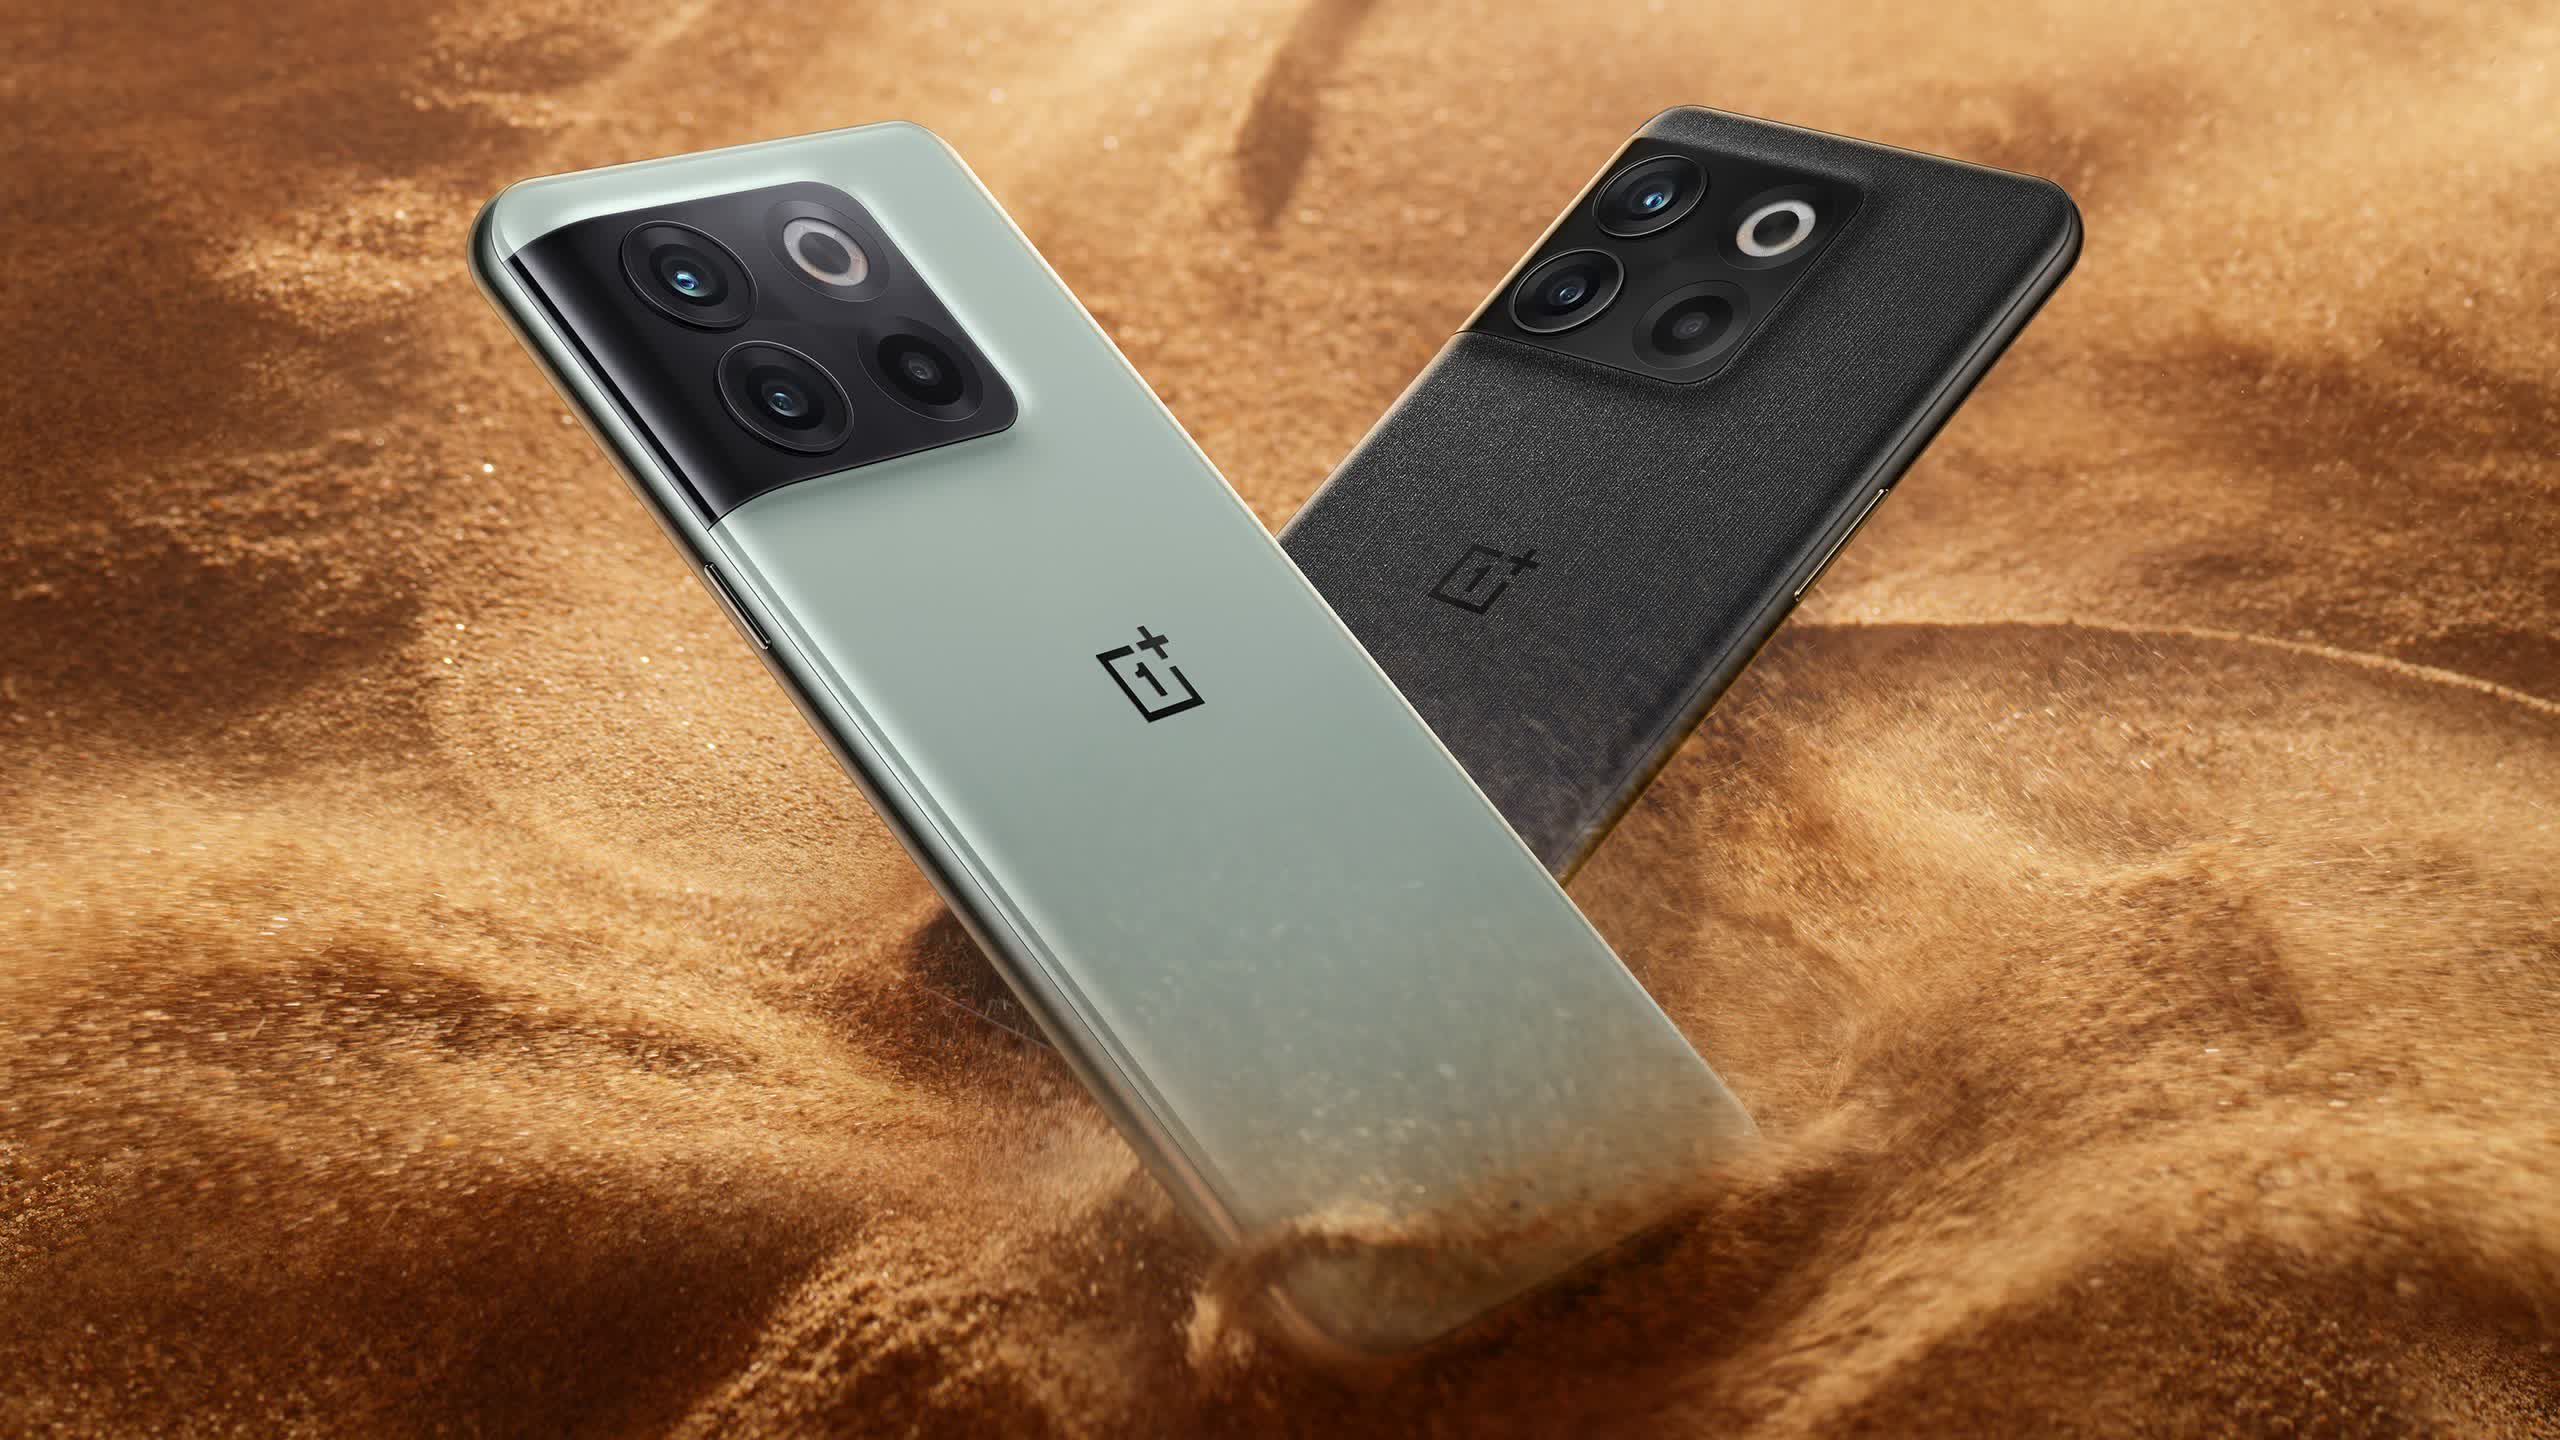 OnePlus 10T unveiled with 150W fast charging and Snapdragon 8+ Gen 1 SoC